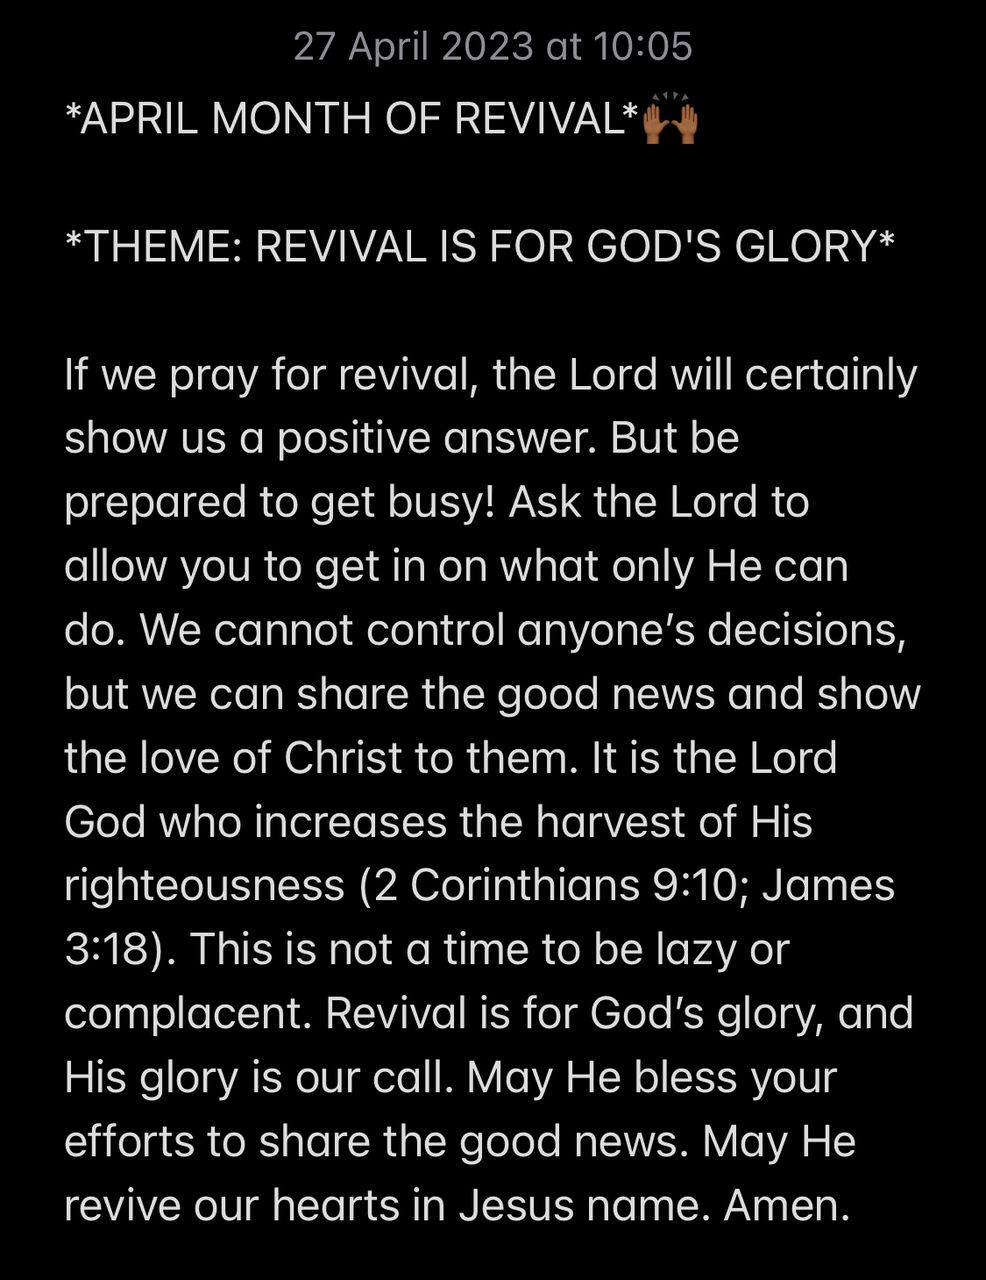 REVIVAL IS FOR GOD'S GLORY